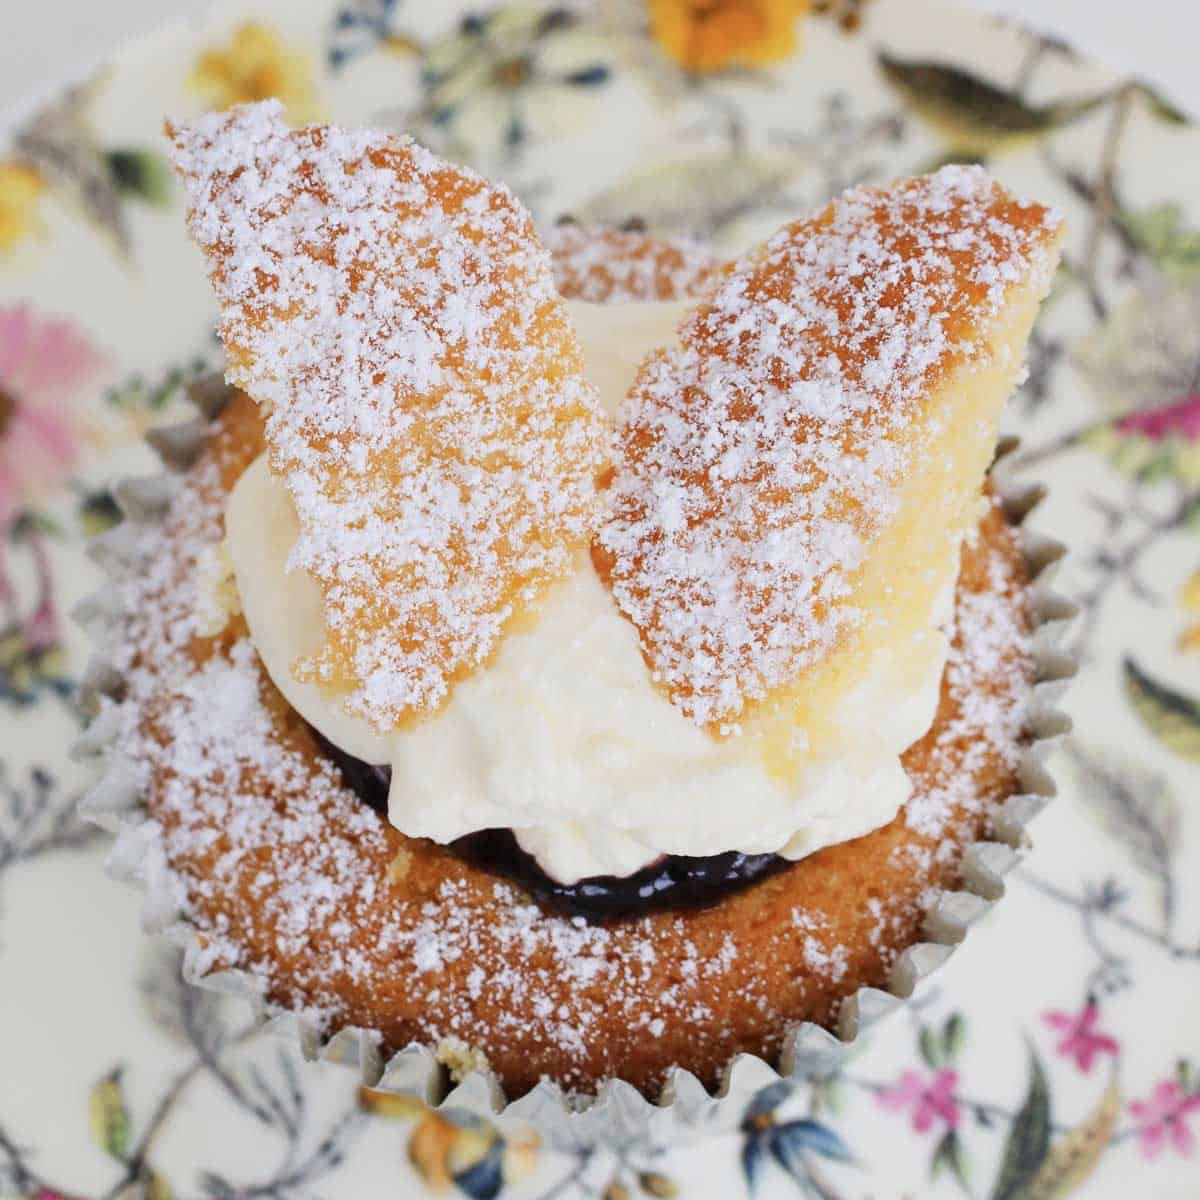 A butterfly cake dusted with icing sugar on a floral plate.